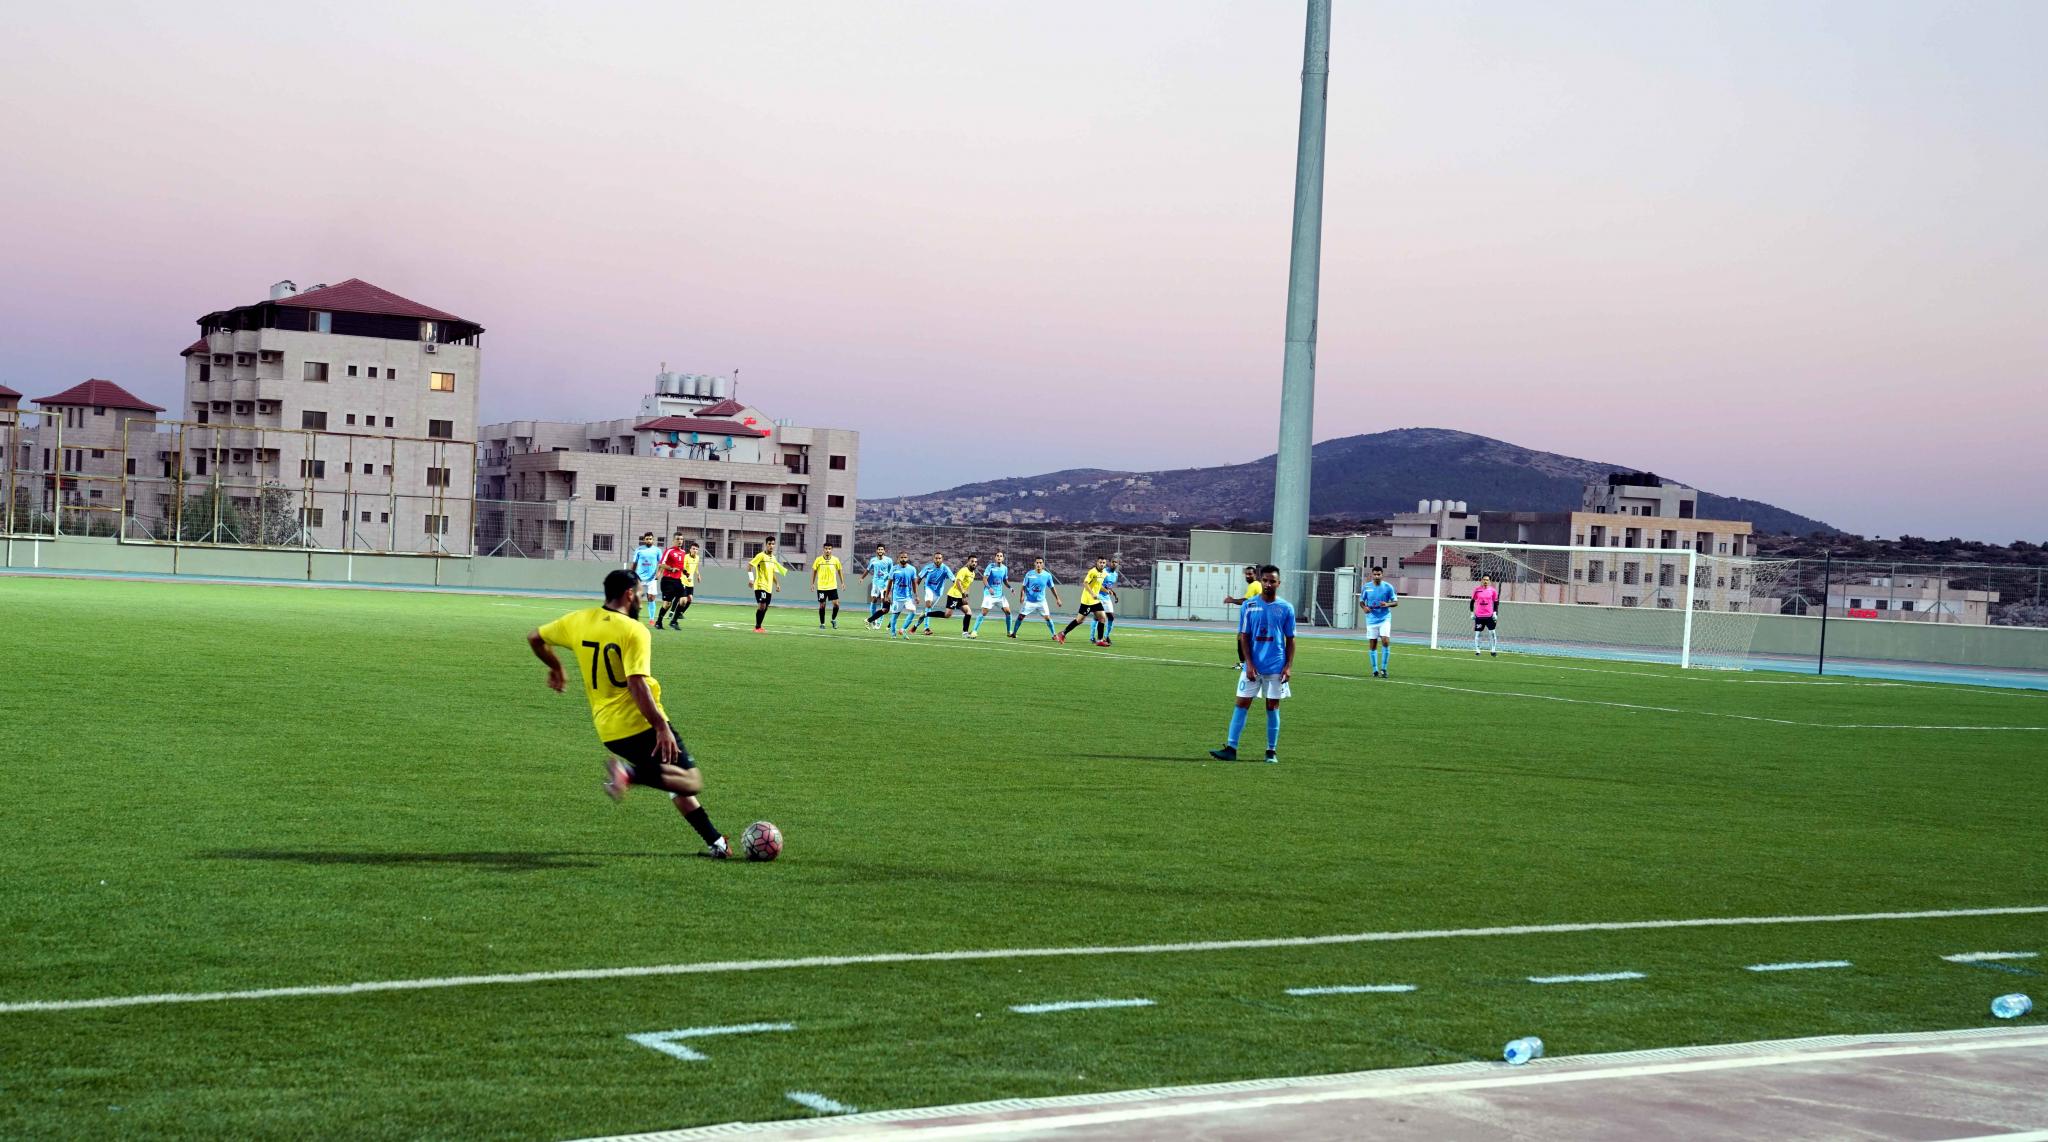 The University Hosts the Second Week of First Degree League in Football